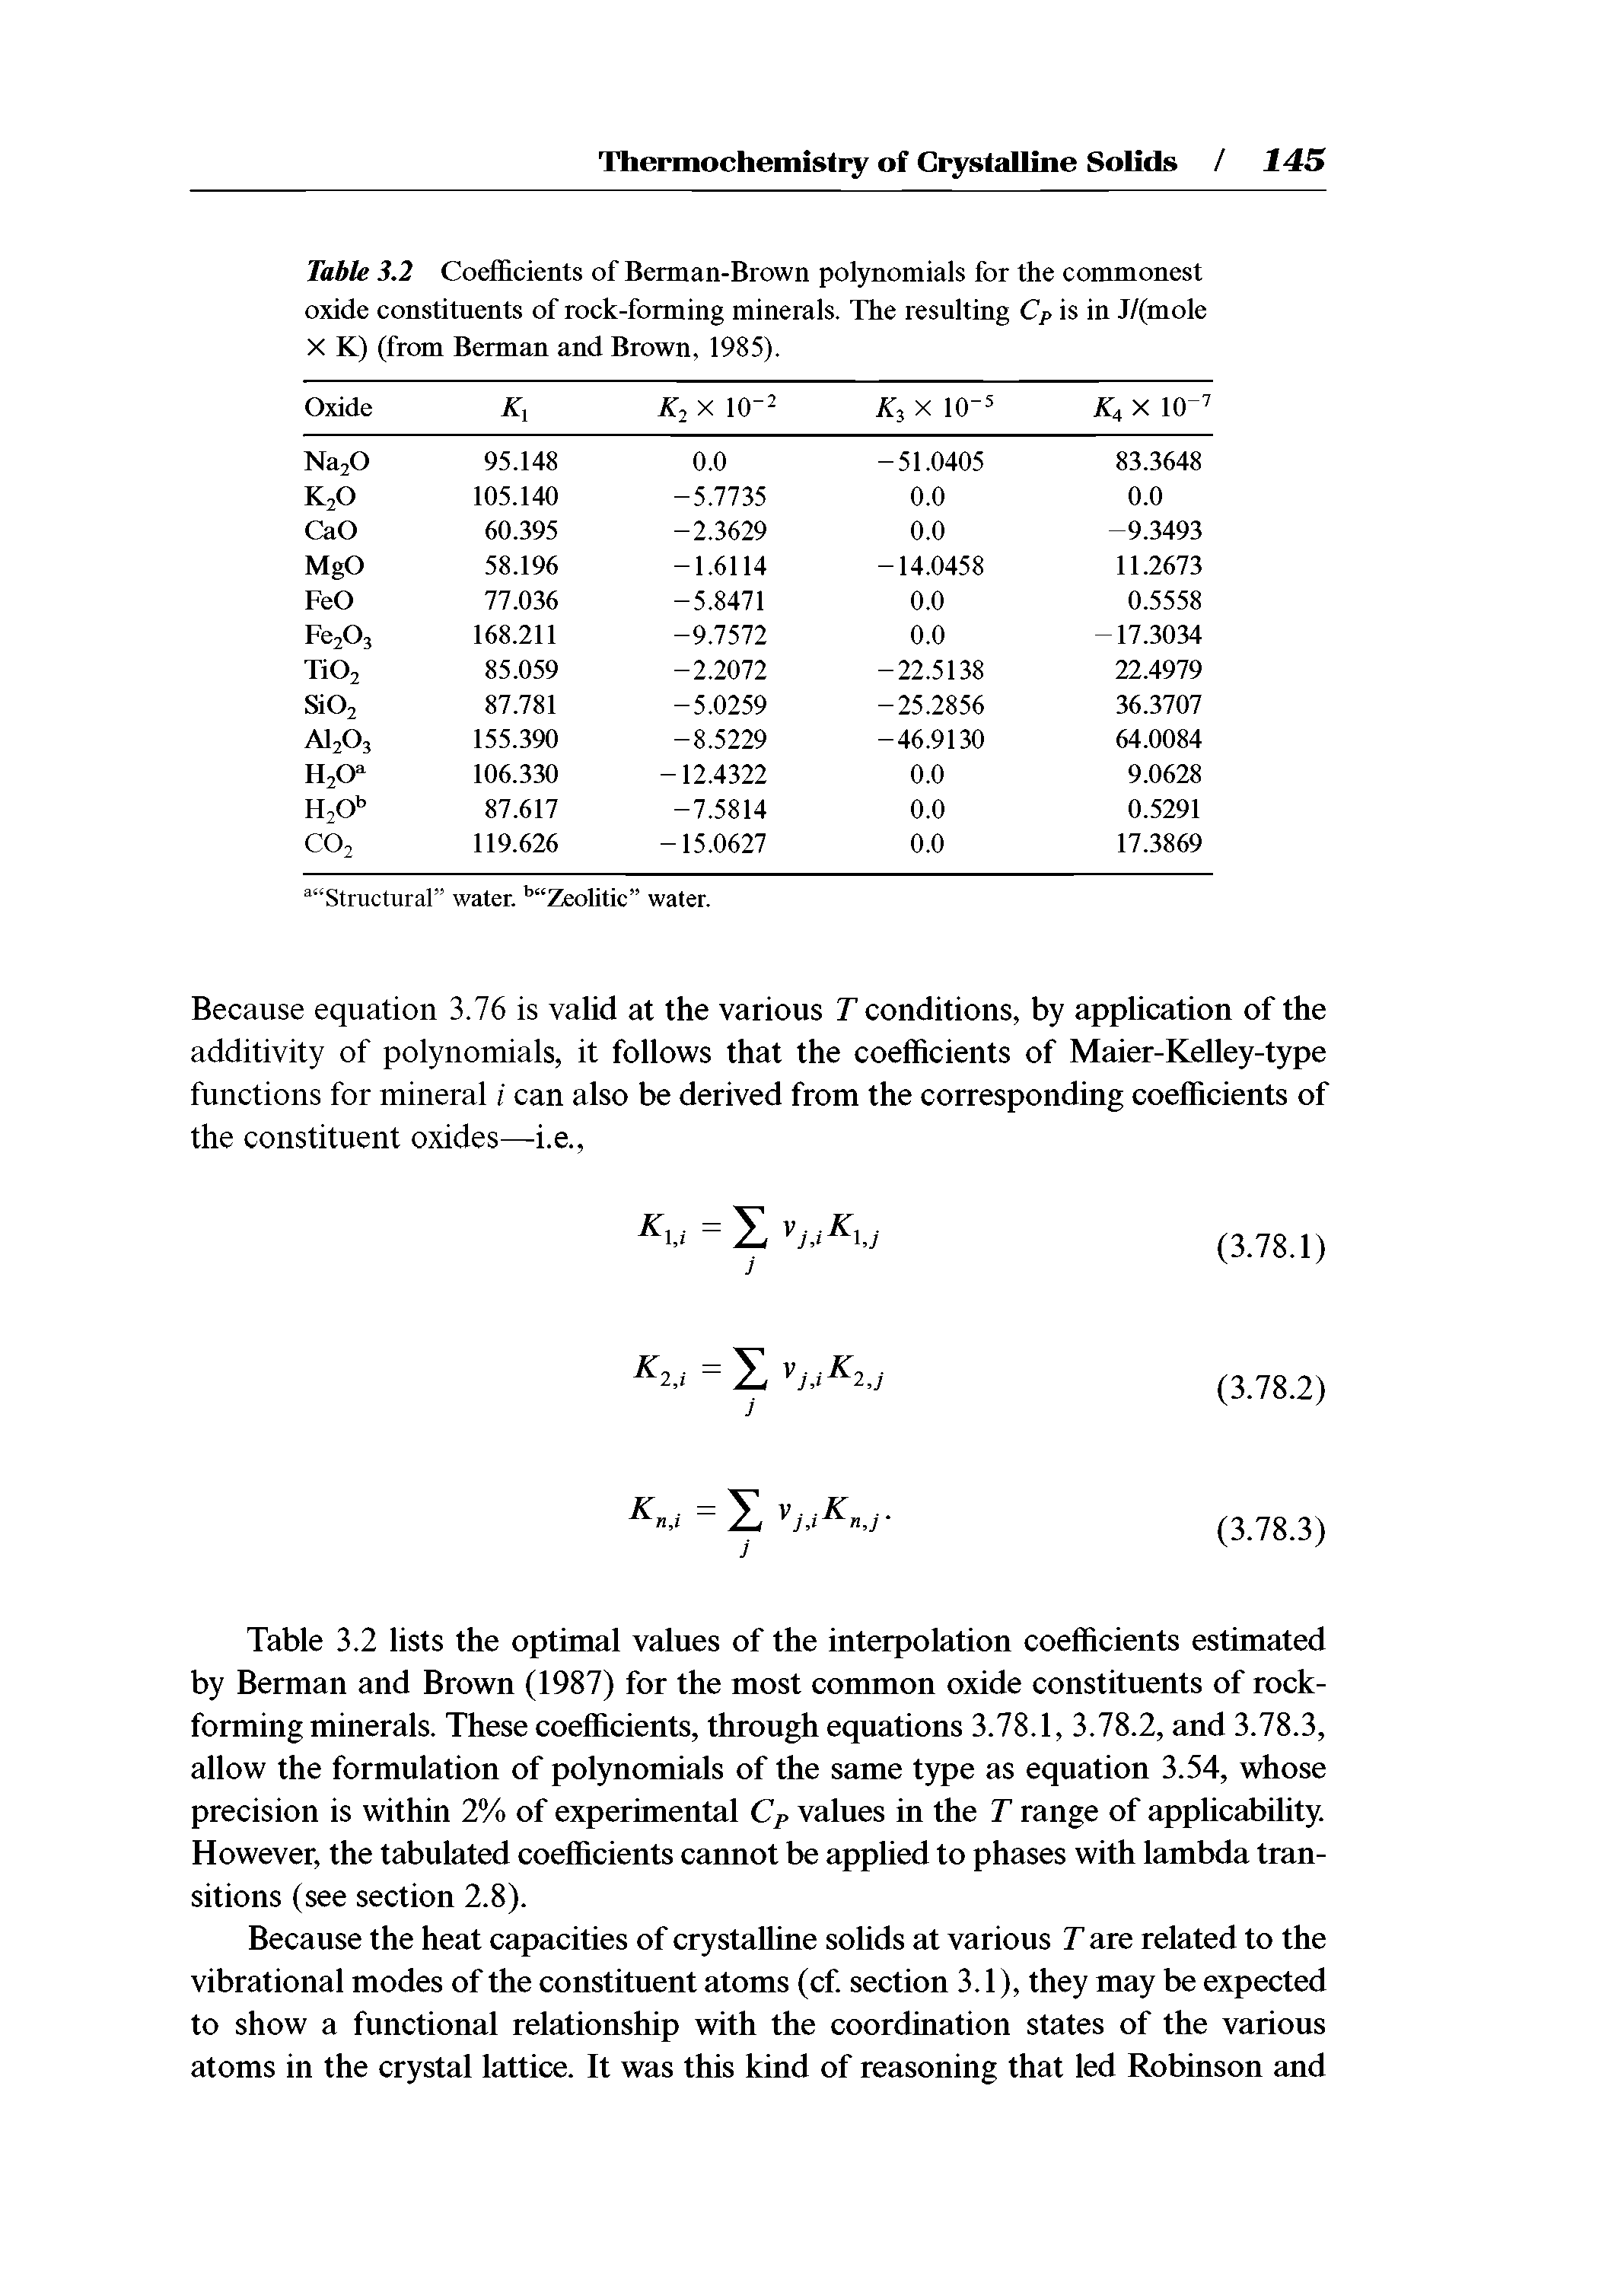 Table 3.2 Coefficients of Berman-Brown polynomials for the commonest oxide constitnents of rock-forming minerals. The resulting Cp is in J/(mole X K) (from Berman and Brown, 1985).